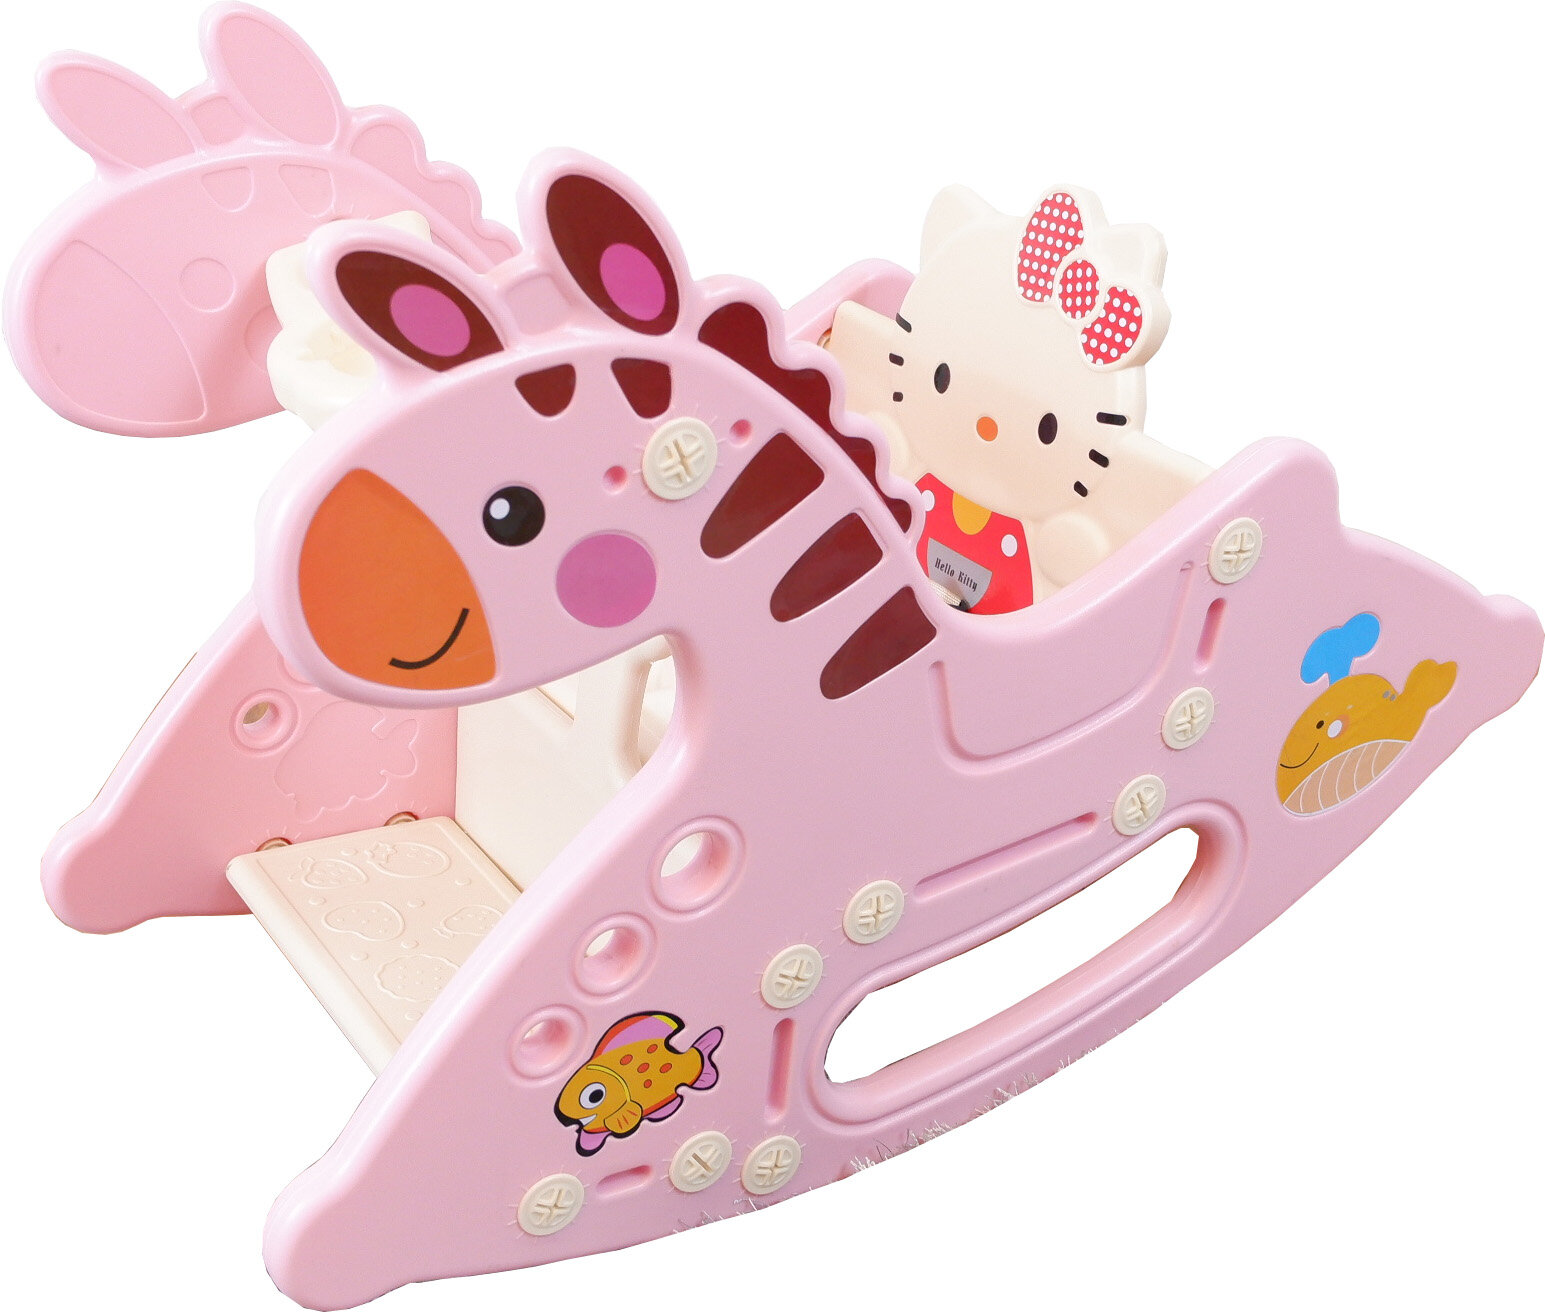 infant rocking horse with seat